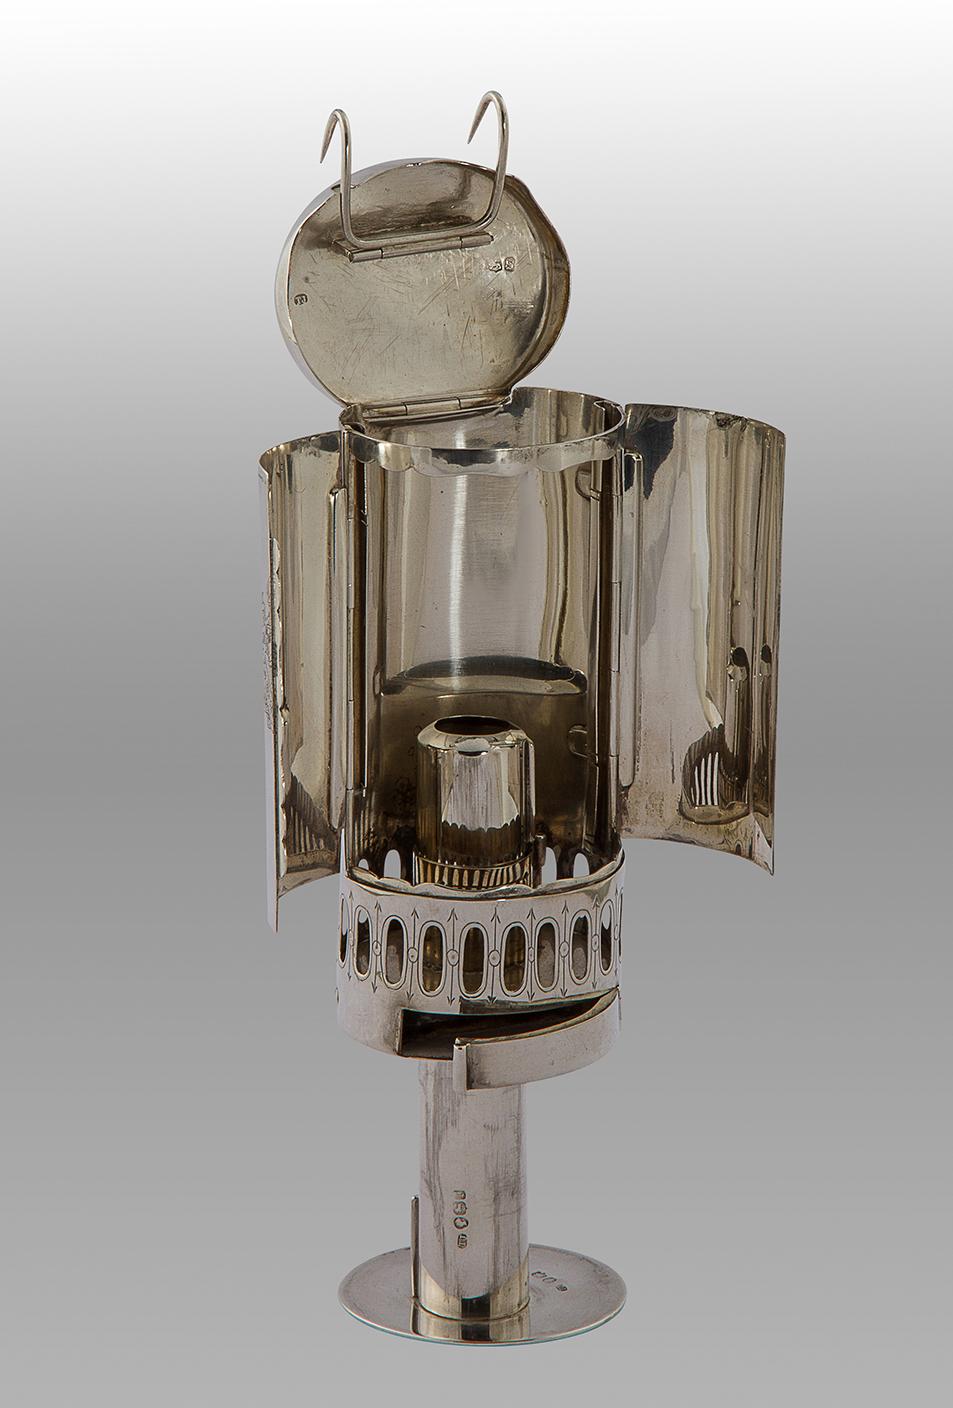 A very good silver travel or carriage lamp by Thomas Johnson.
As with most English travel and campaign pieces, the design is ingenious, the purpose being to create a completely practical item that will withstand the rigors of travel in 19th century